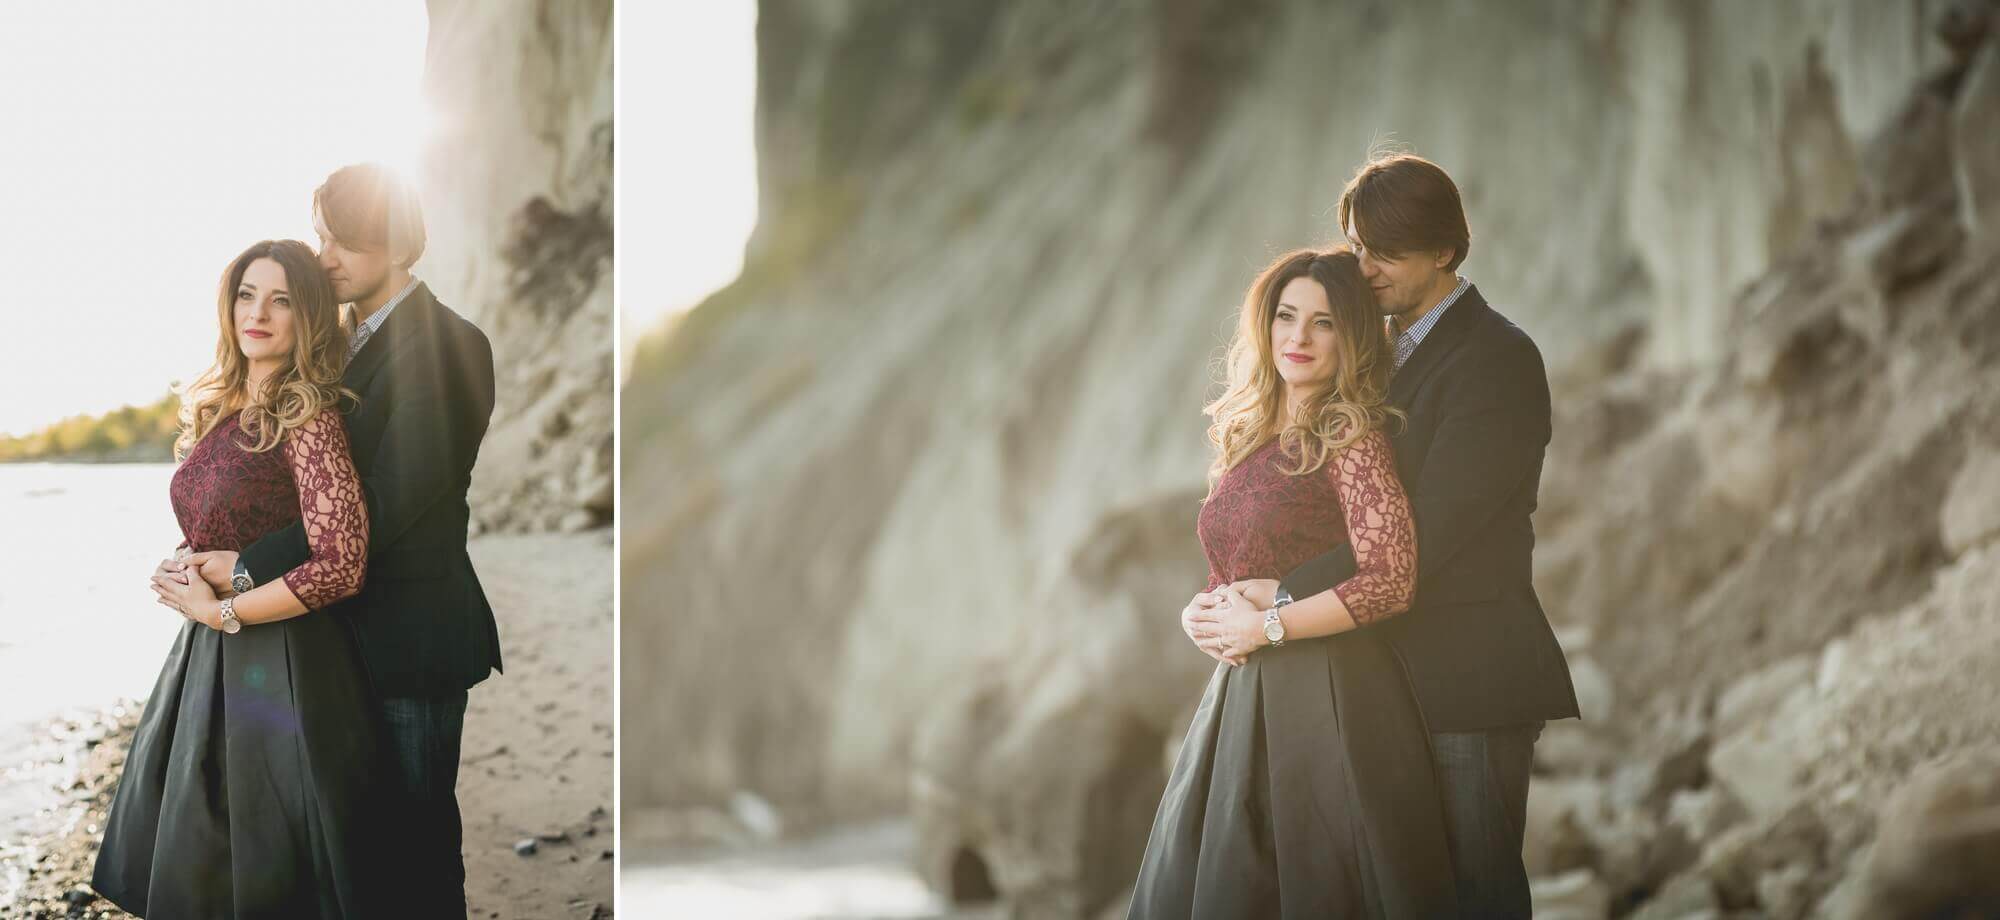 Beautiful sun-flare image of the bride-to-be wrapped in her finace's arms for their engagement shoot at Scarborough Bluffs in Toronto